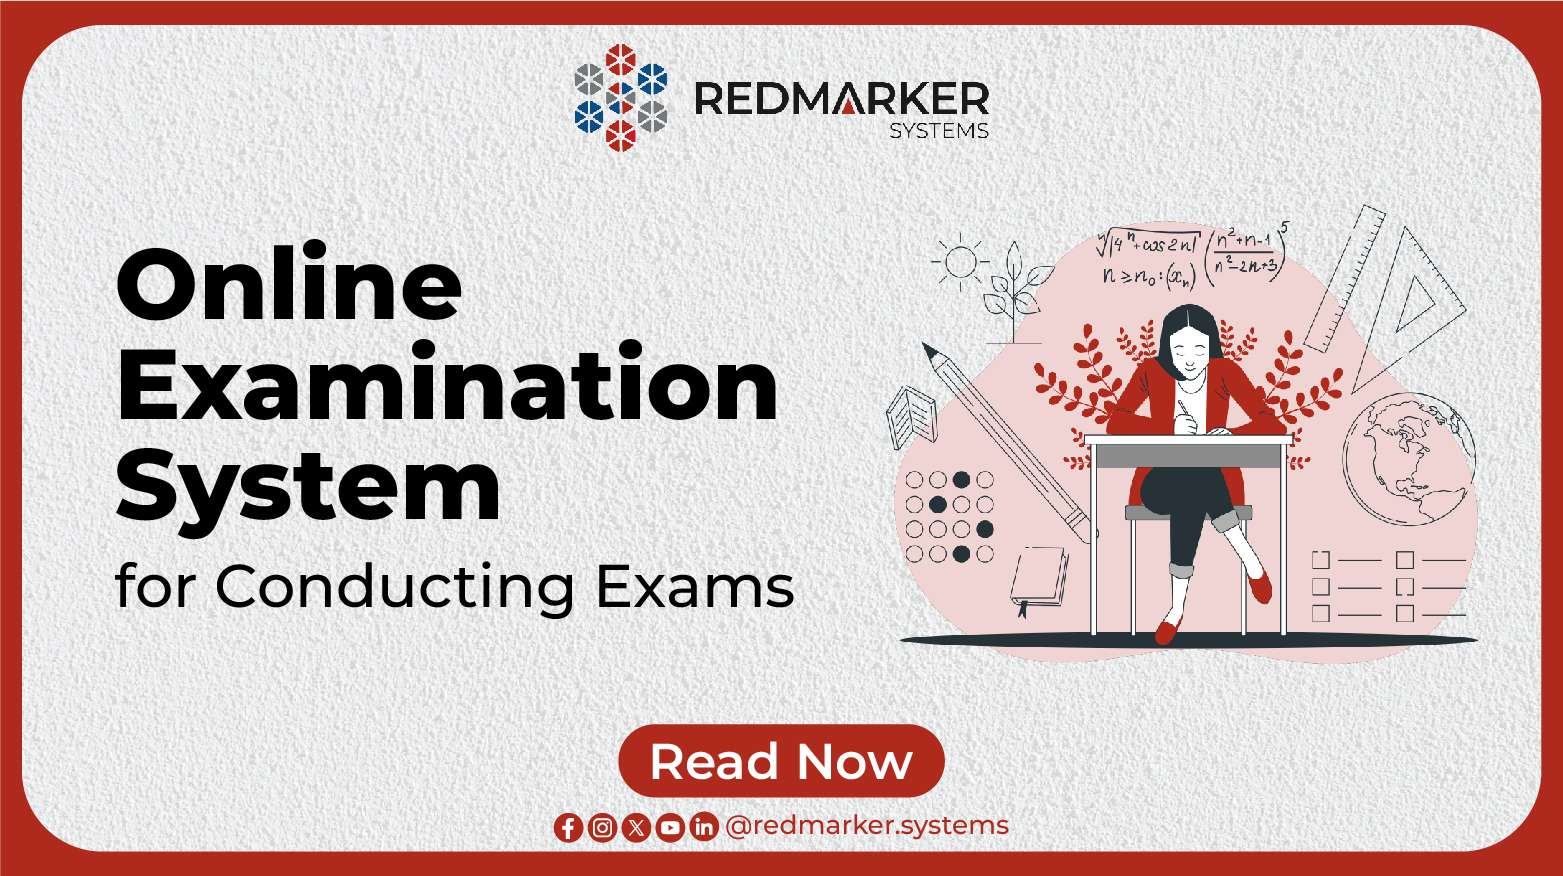 Online Examination System for Conducting Exams